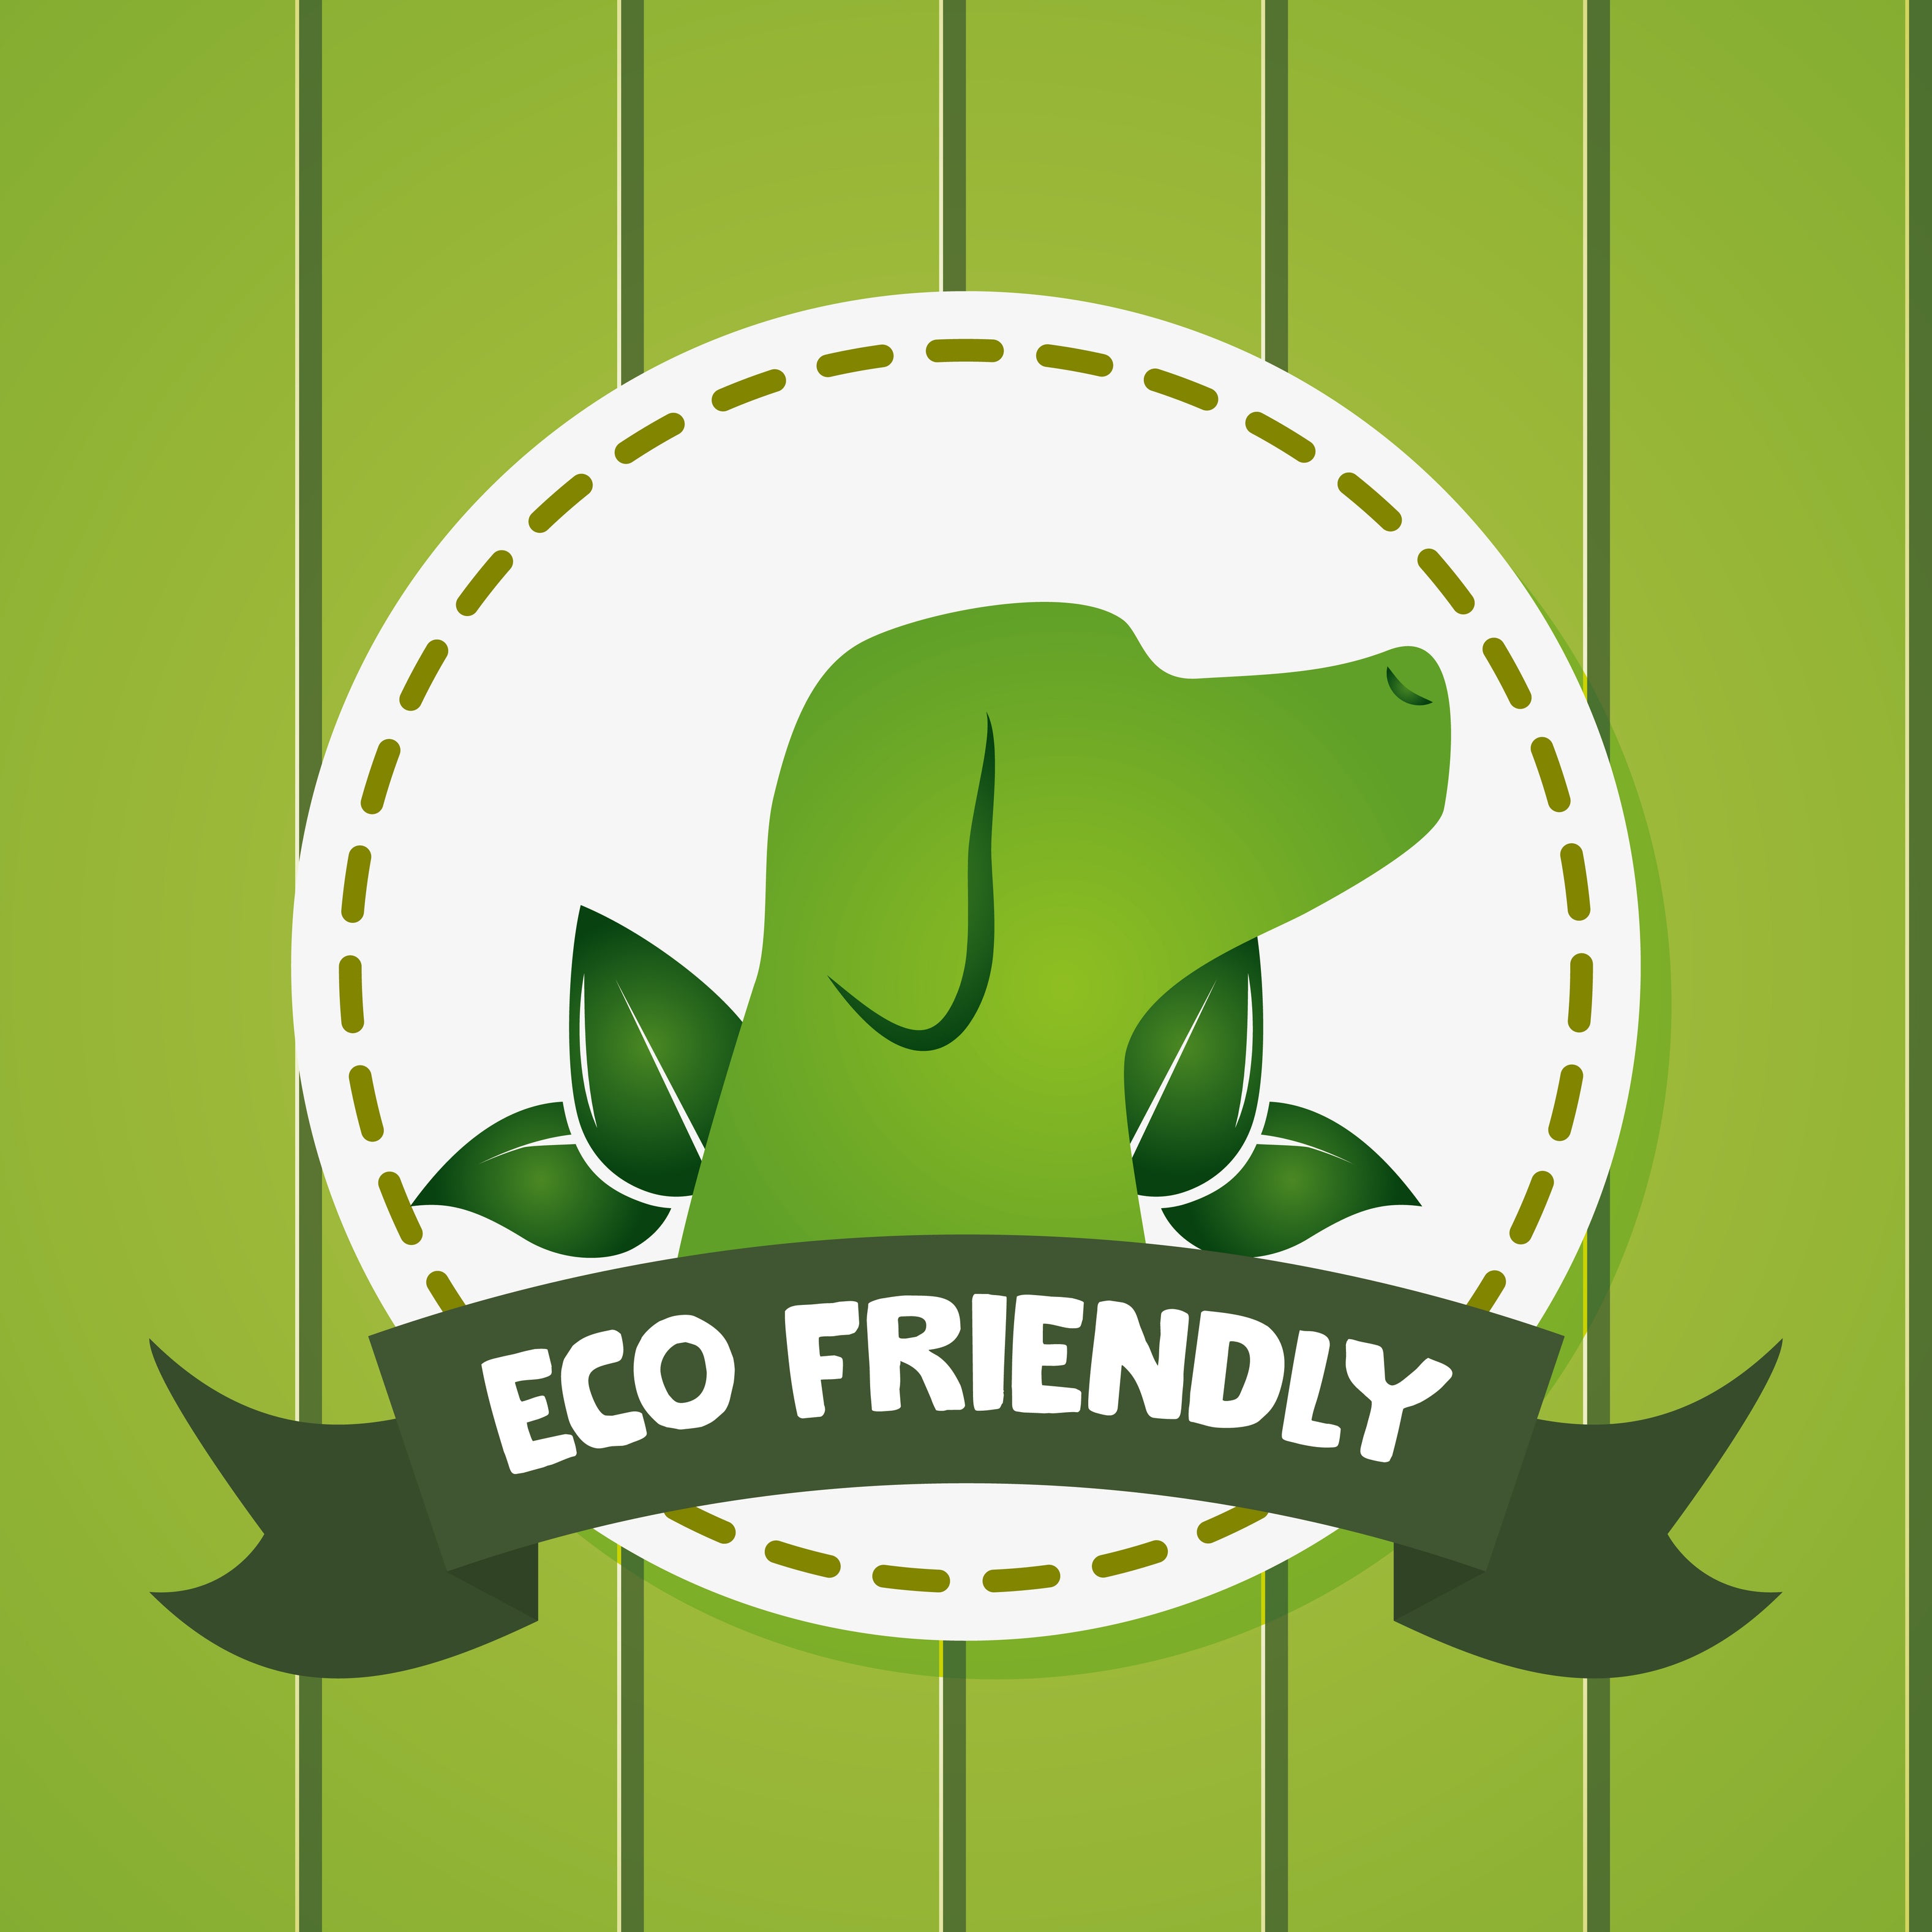 6 Ways to be Eco-Friendly as a Pet Owner